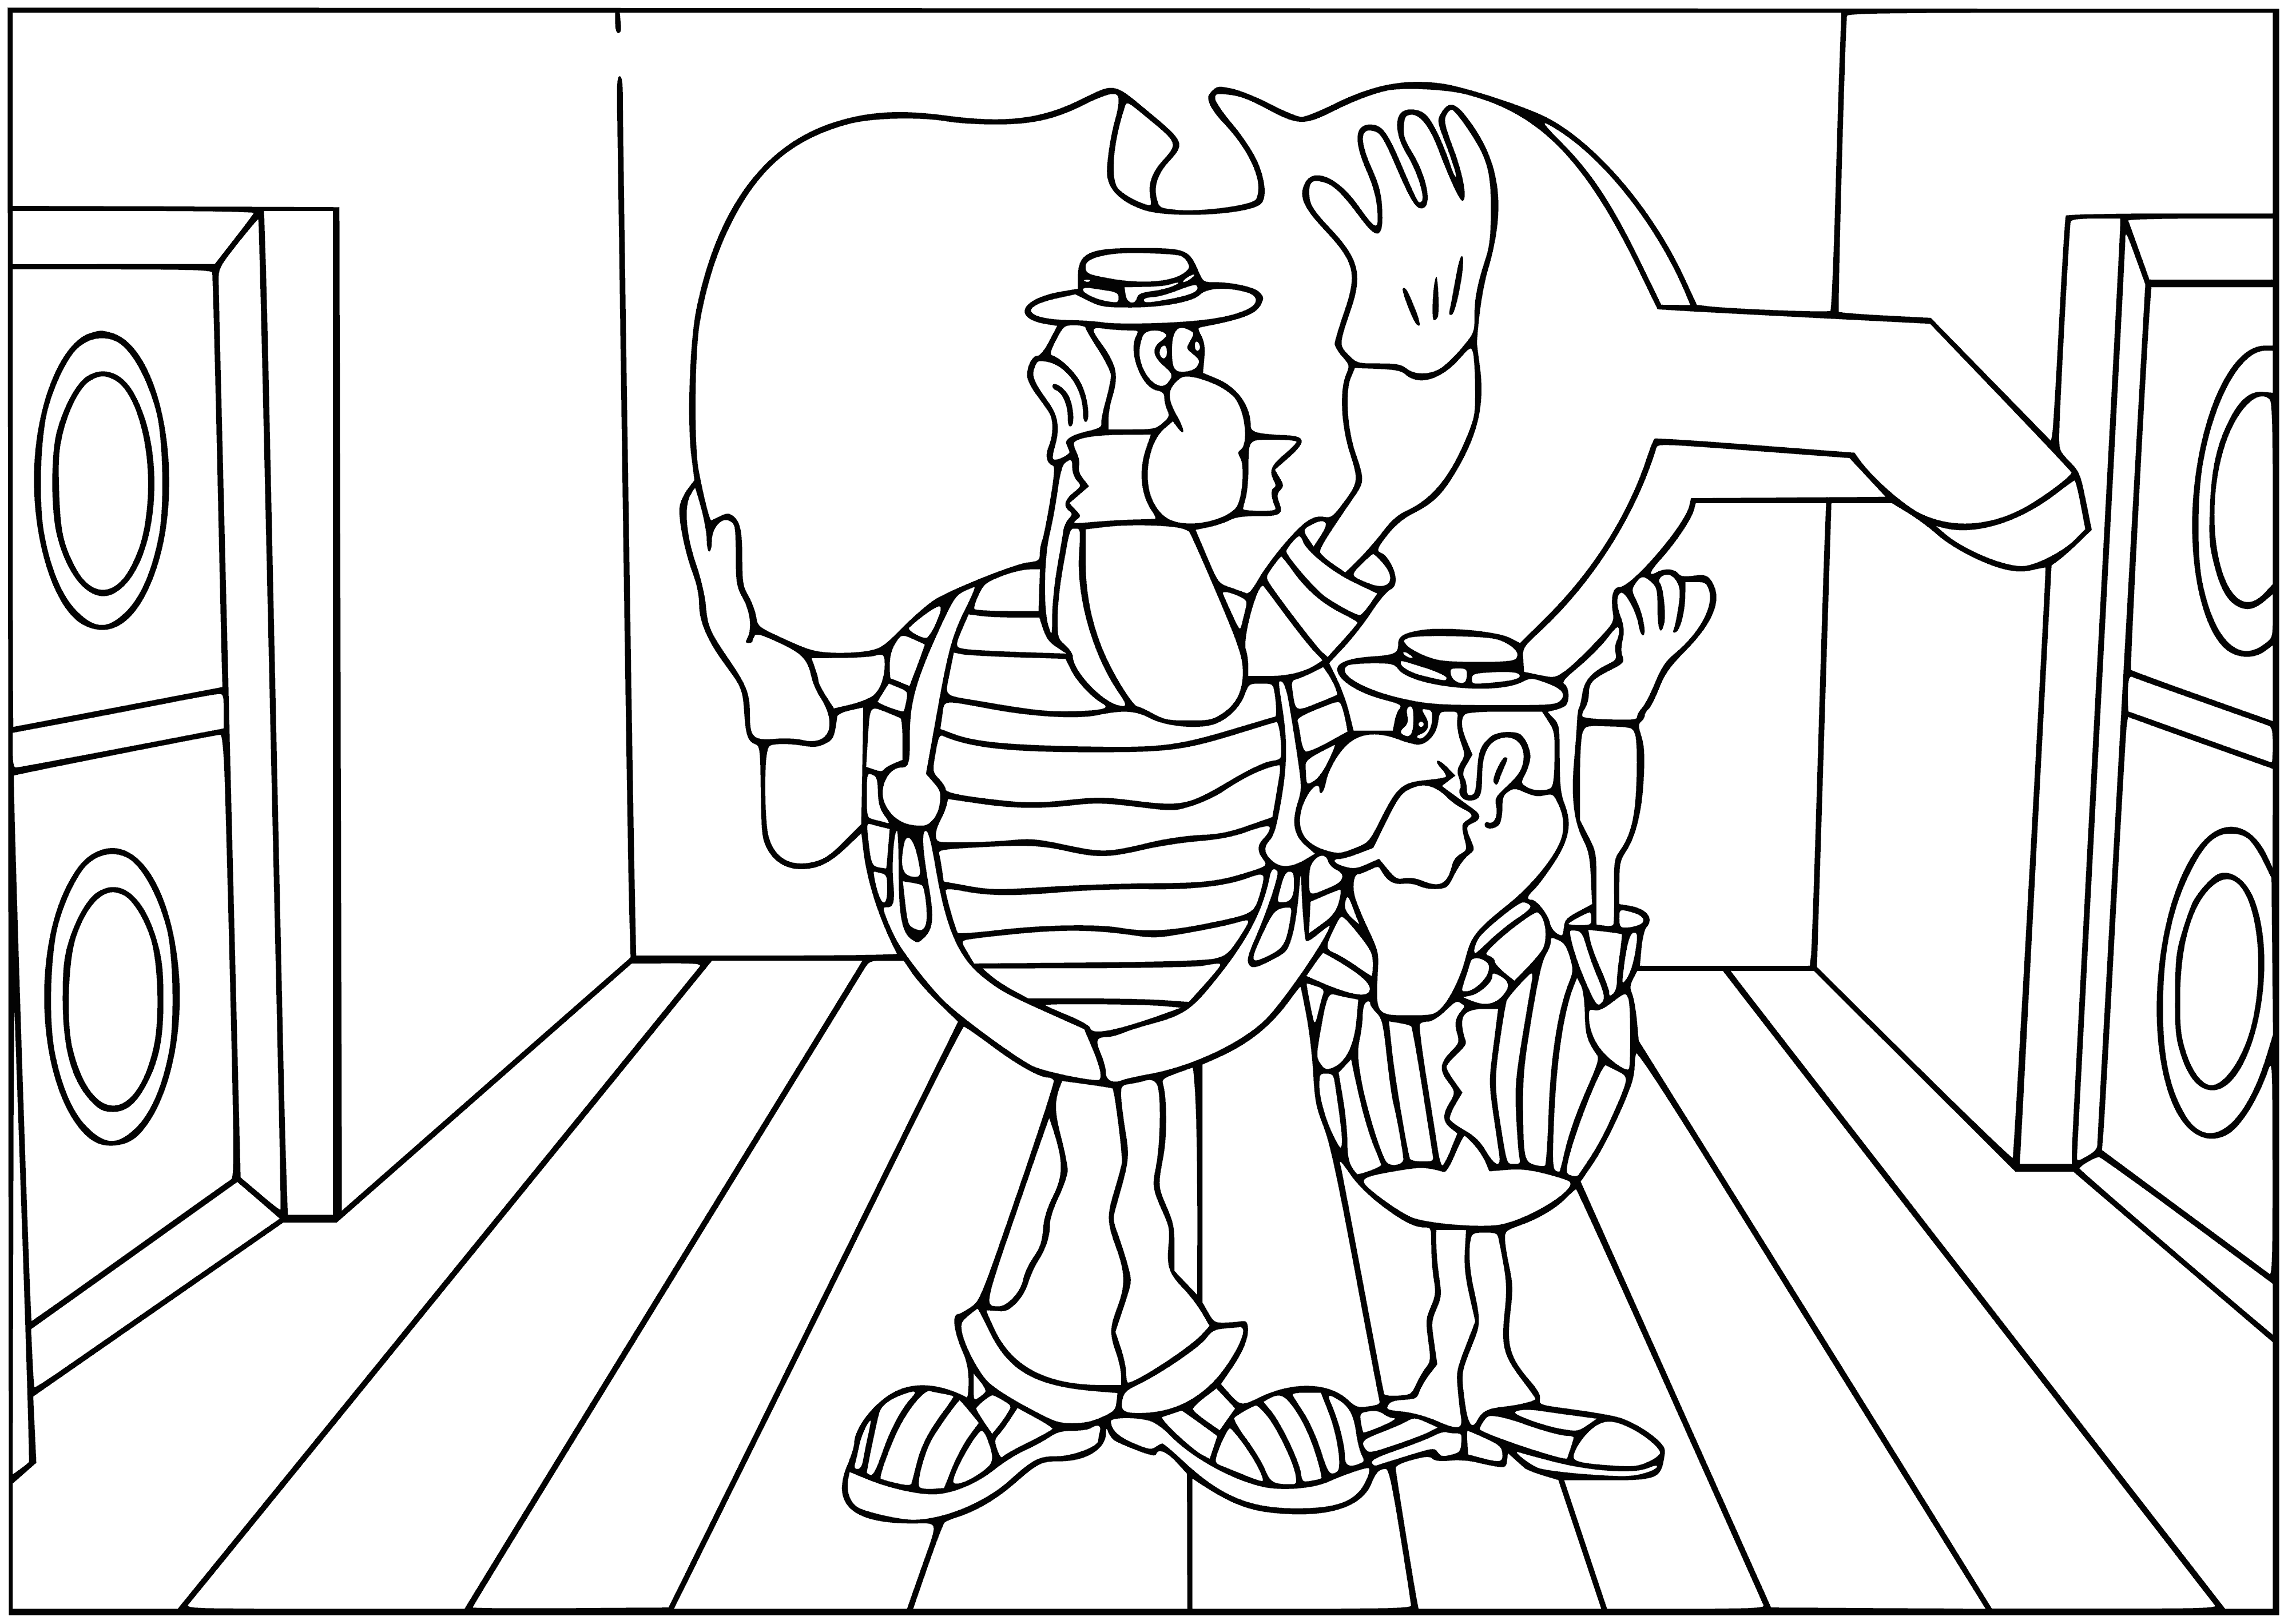 coloring page: Group of people look upset at stolen statue of man wearing cape & hat, holding sword. #theft #statue #upset